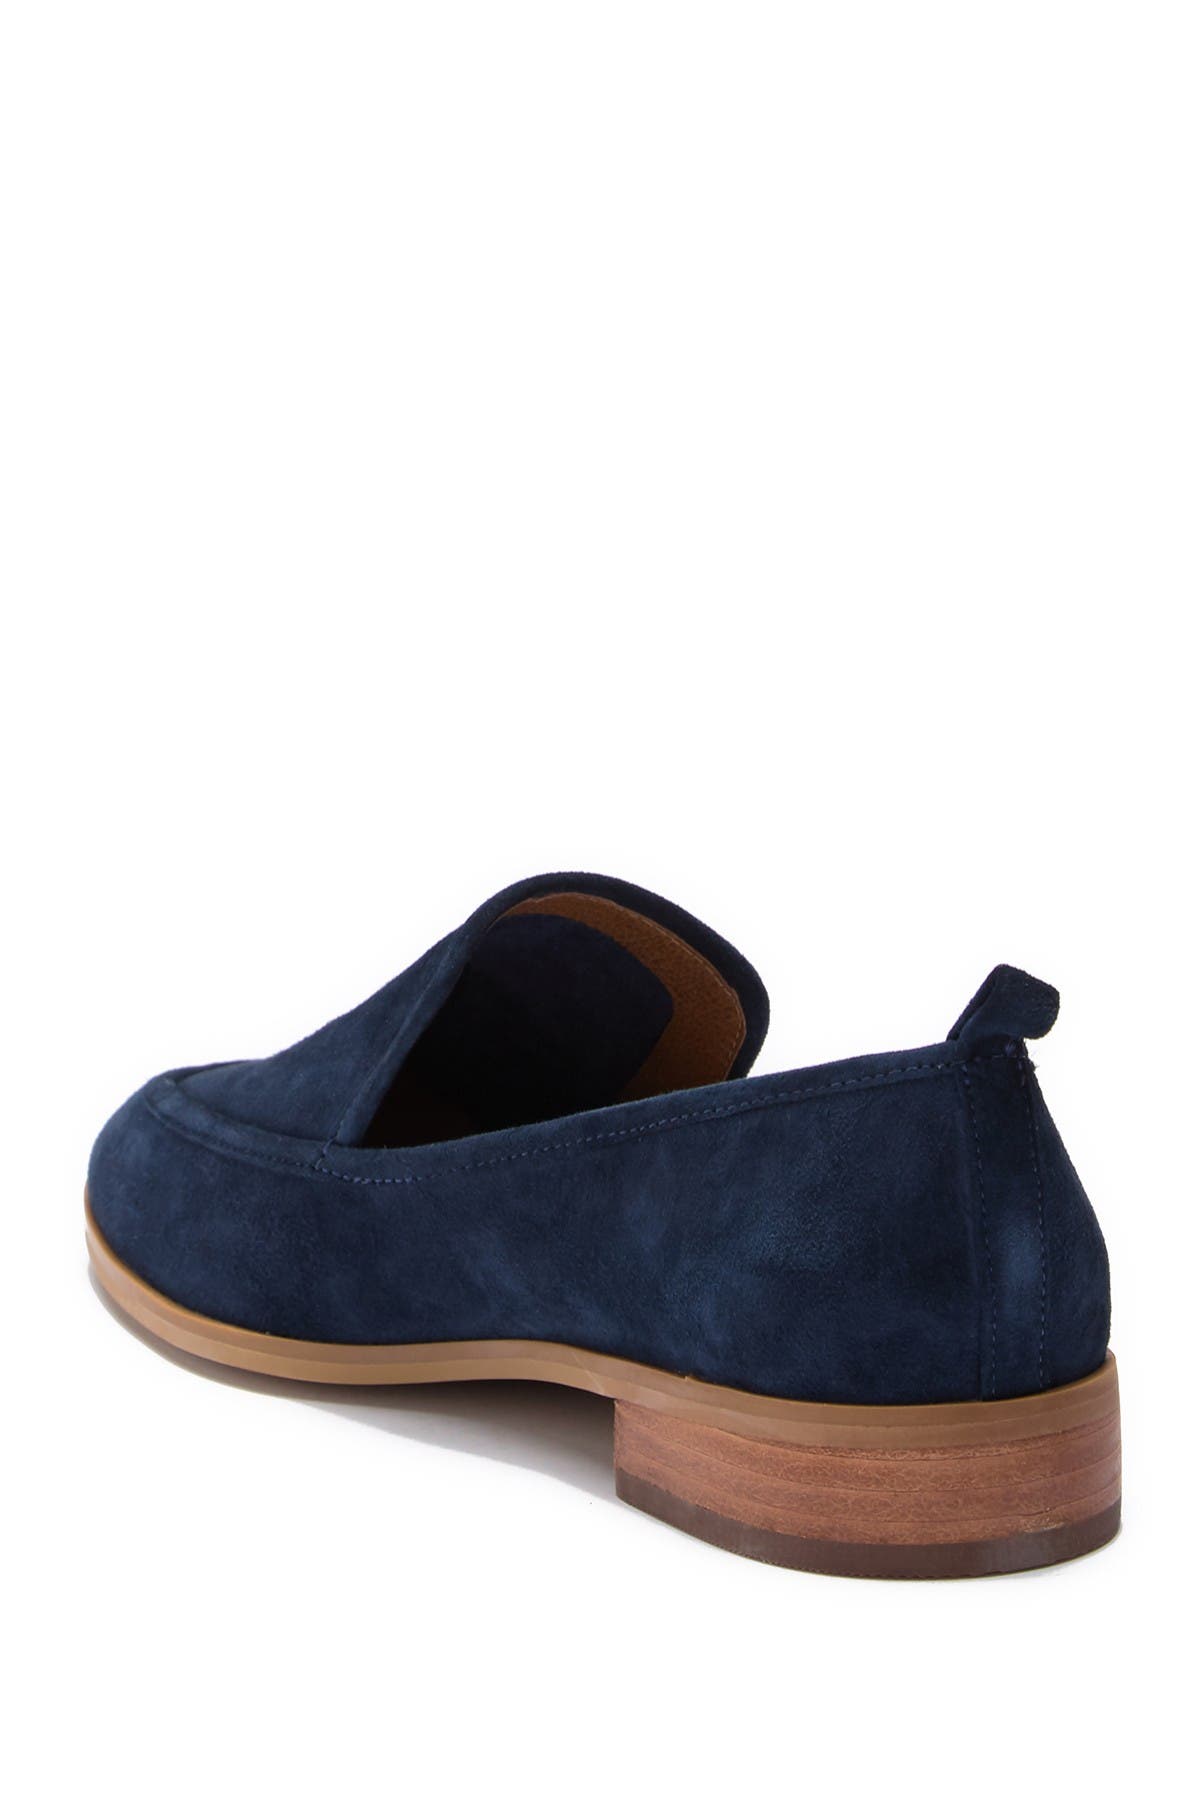 susina loafers nordstrom rack